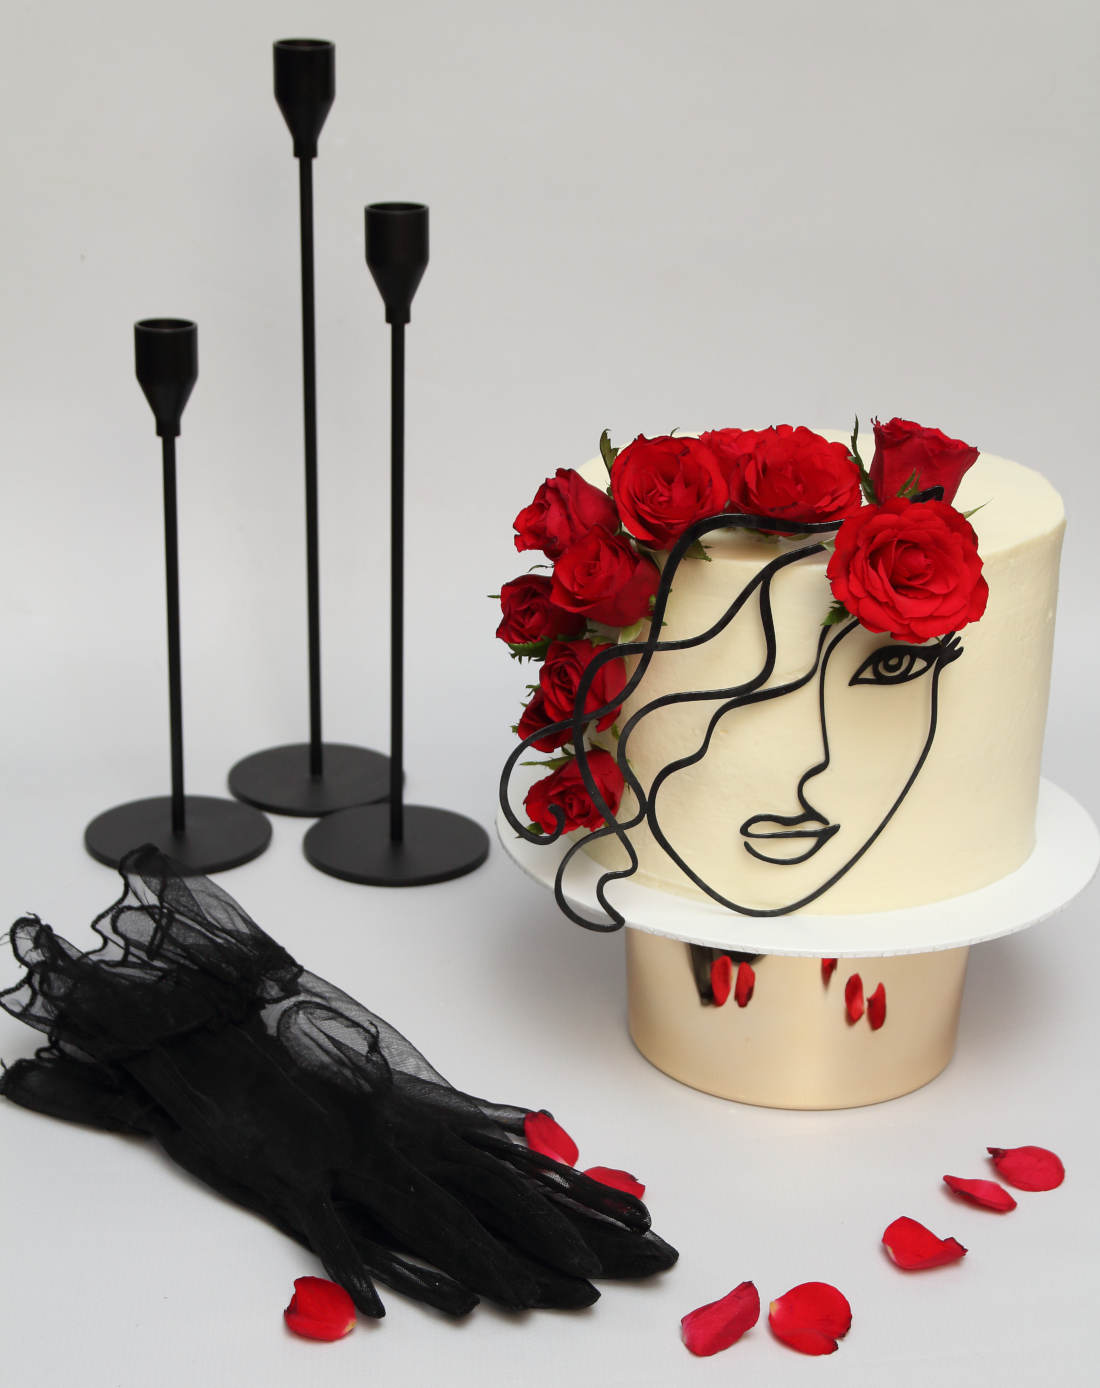 Cake with roses and candlesticks